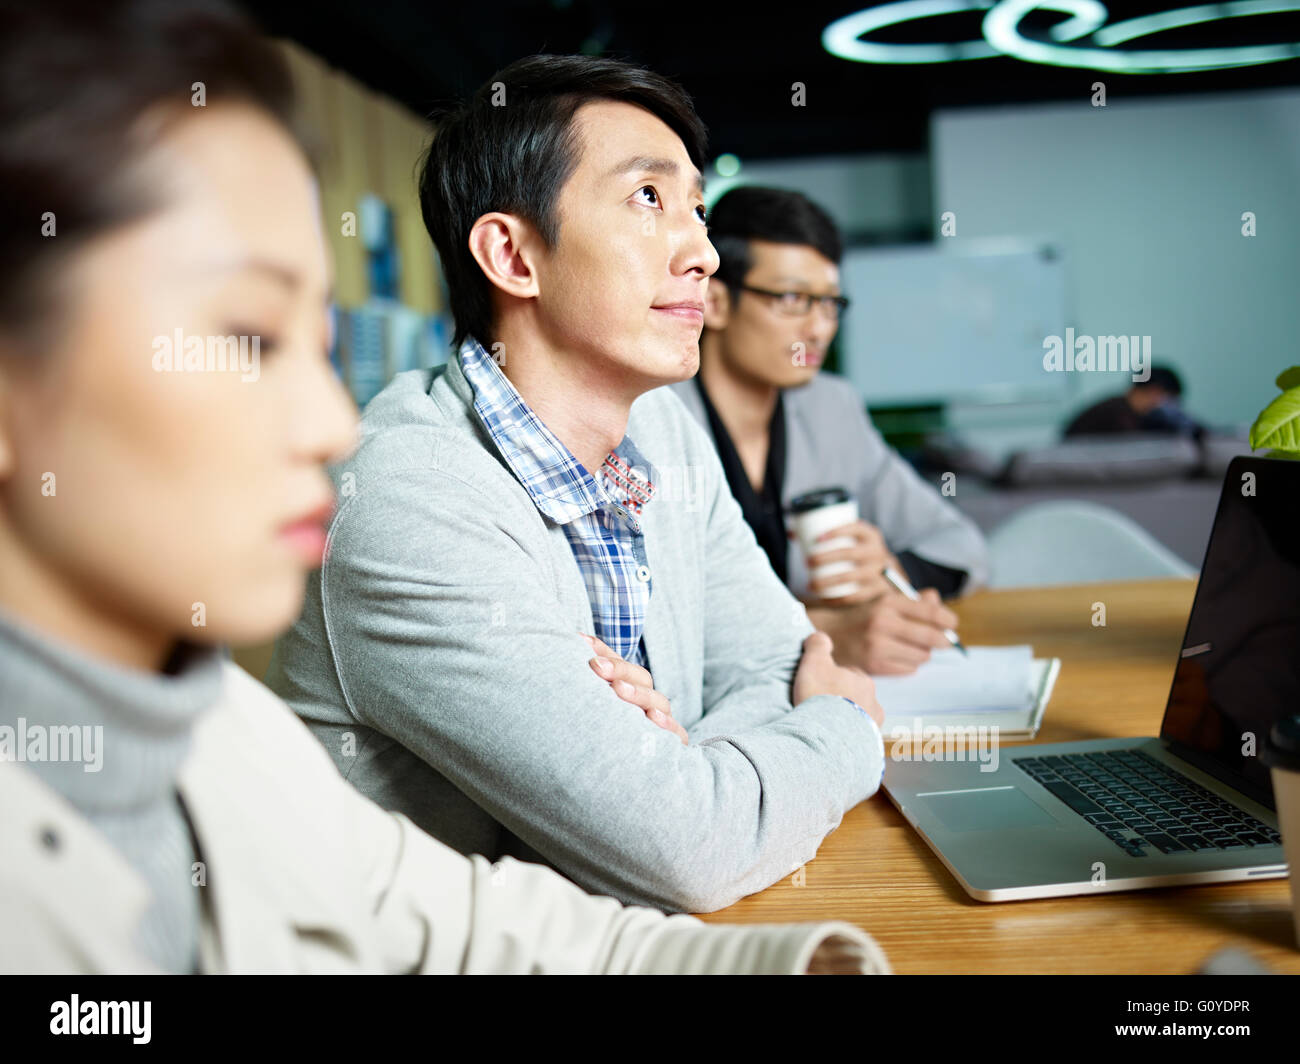 contemplating young asian business person Stock Photo